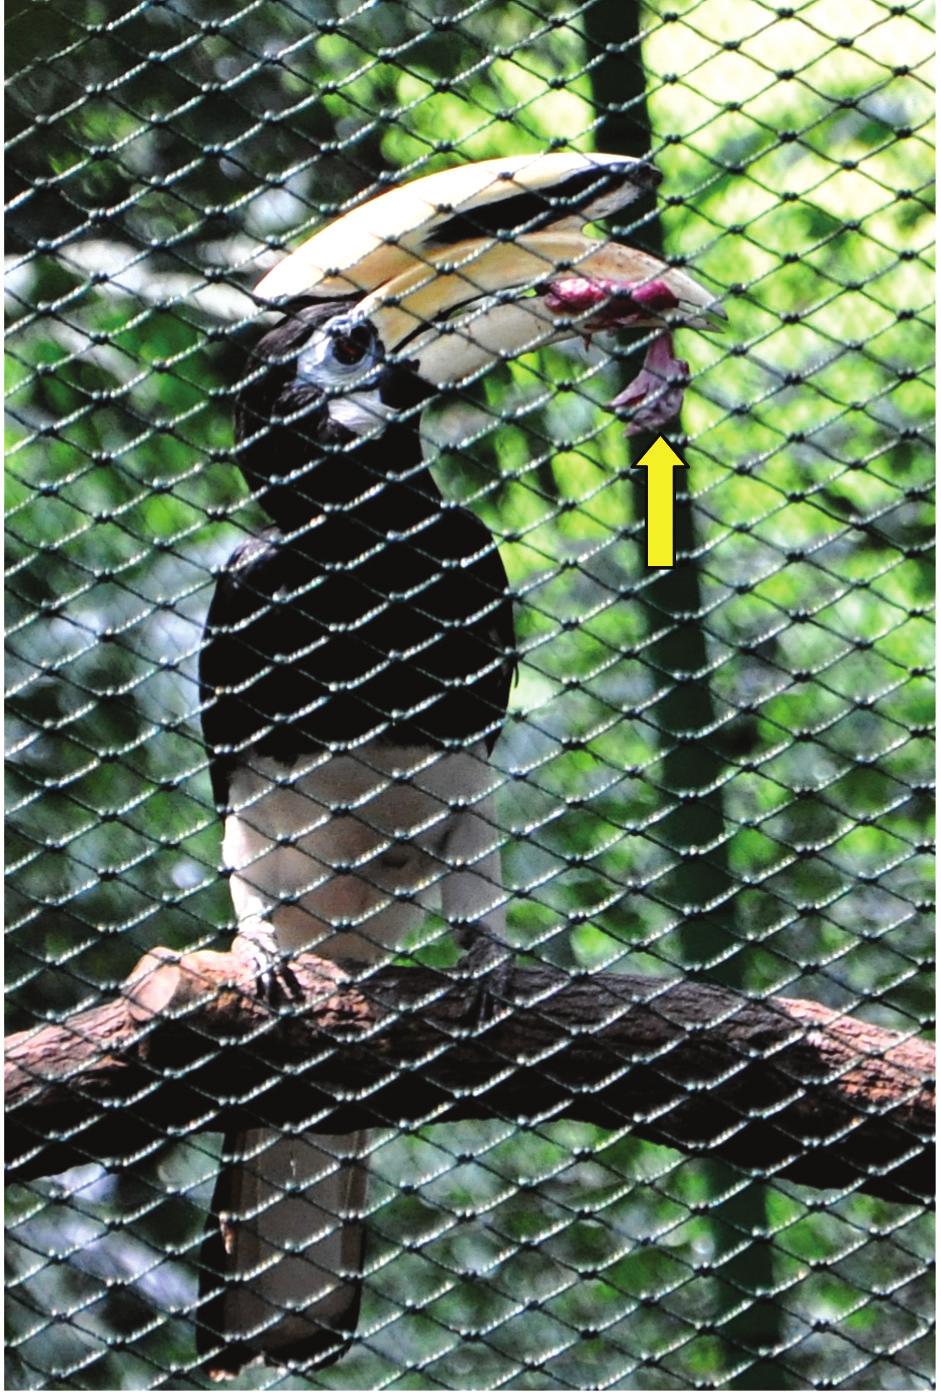 Cremades et al.: Reintroduction of hornbills in Singapore Factors that might have contributed to cannibalism in the second clutch.